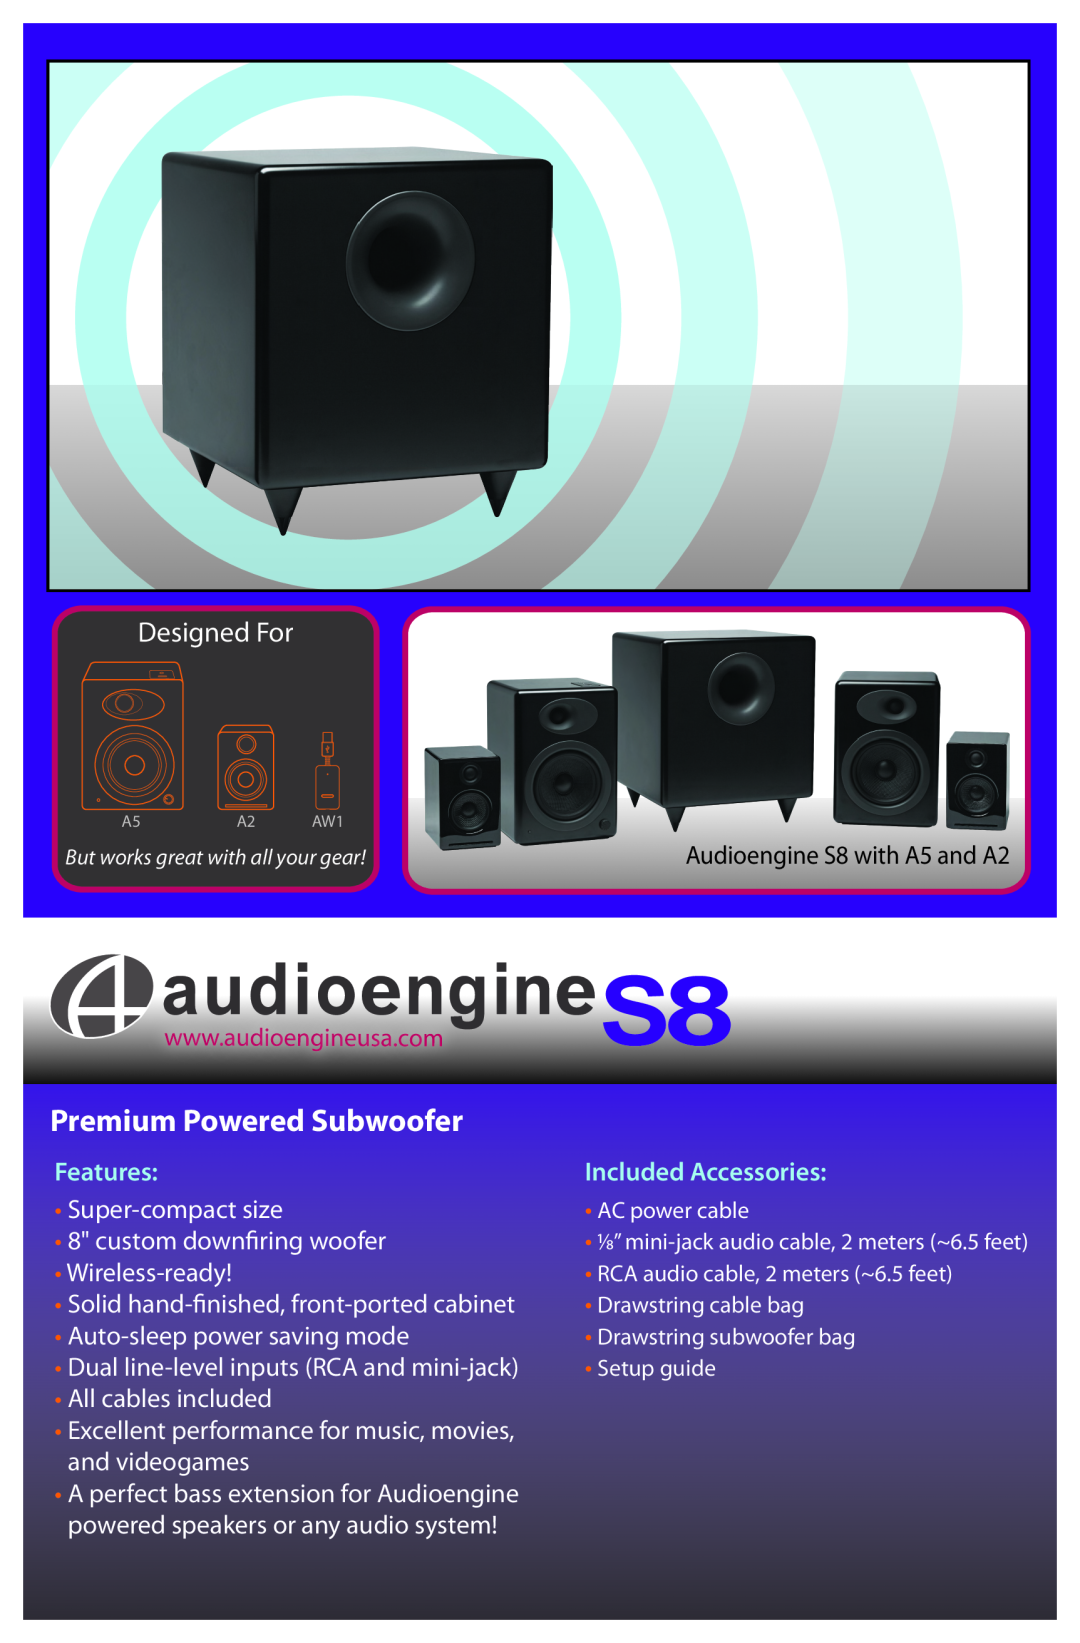 AudioEngine AS8 manual Premium Powered Subwoofer, Designed For, Features, Included Accessories 